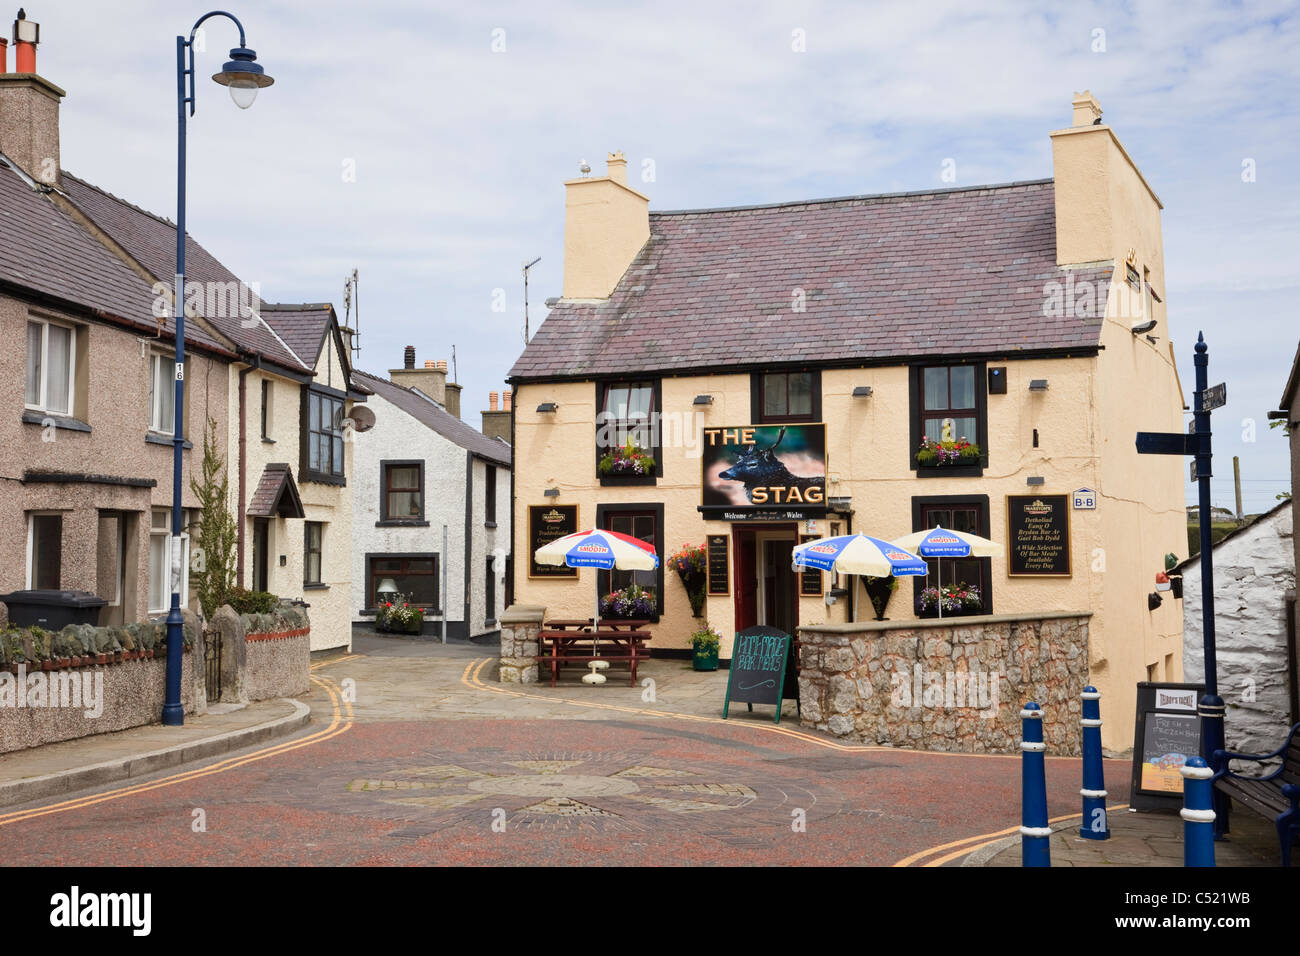 Cemaes, Isle of Anglesey, au nord du Pays de Galles, Royaume-Uni, Angleterre. Le pub Stag dans village le plus au nord du Pays de Galles. Banque D'Images